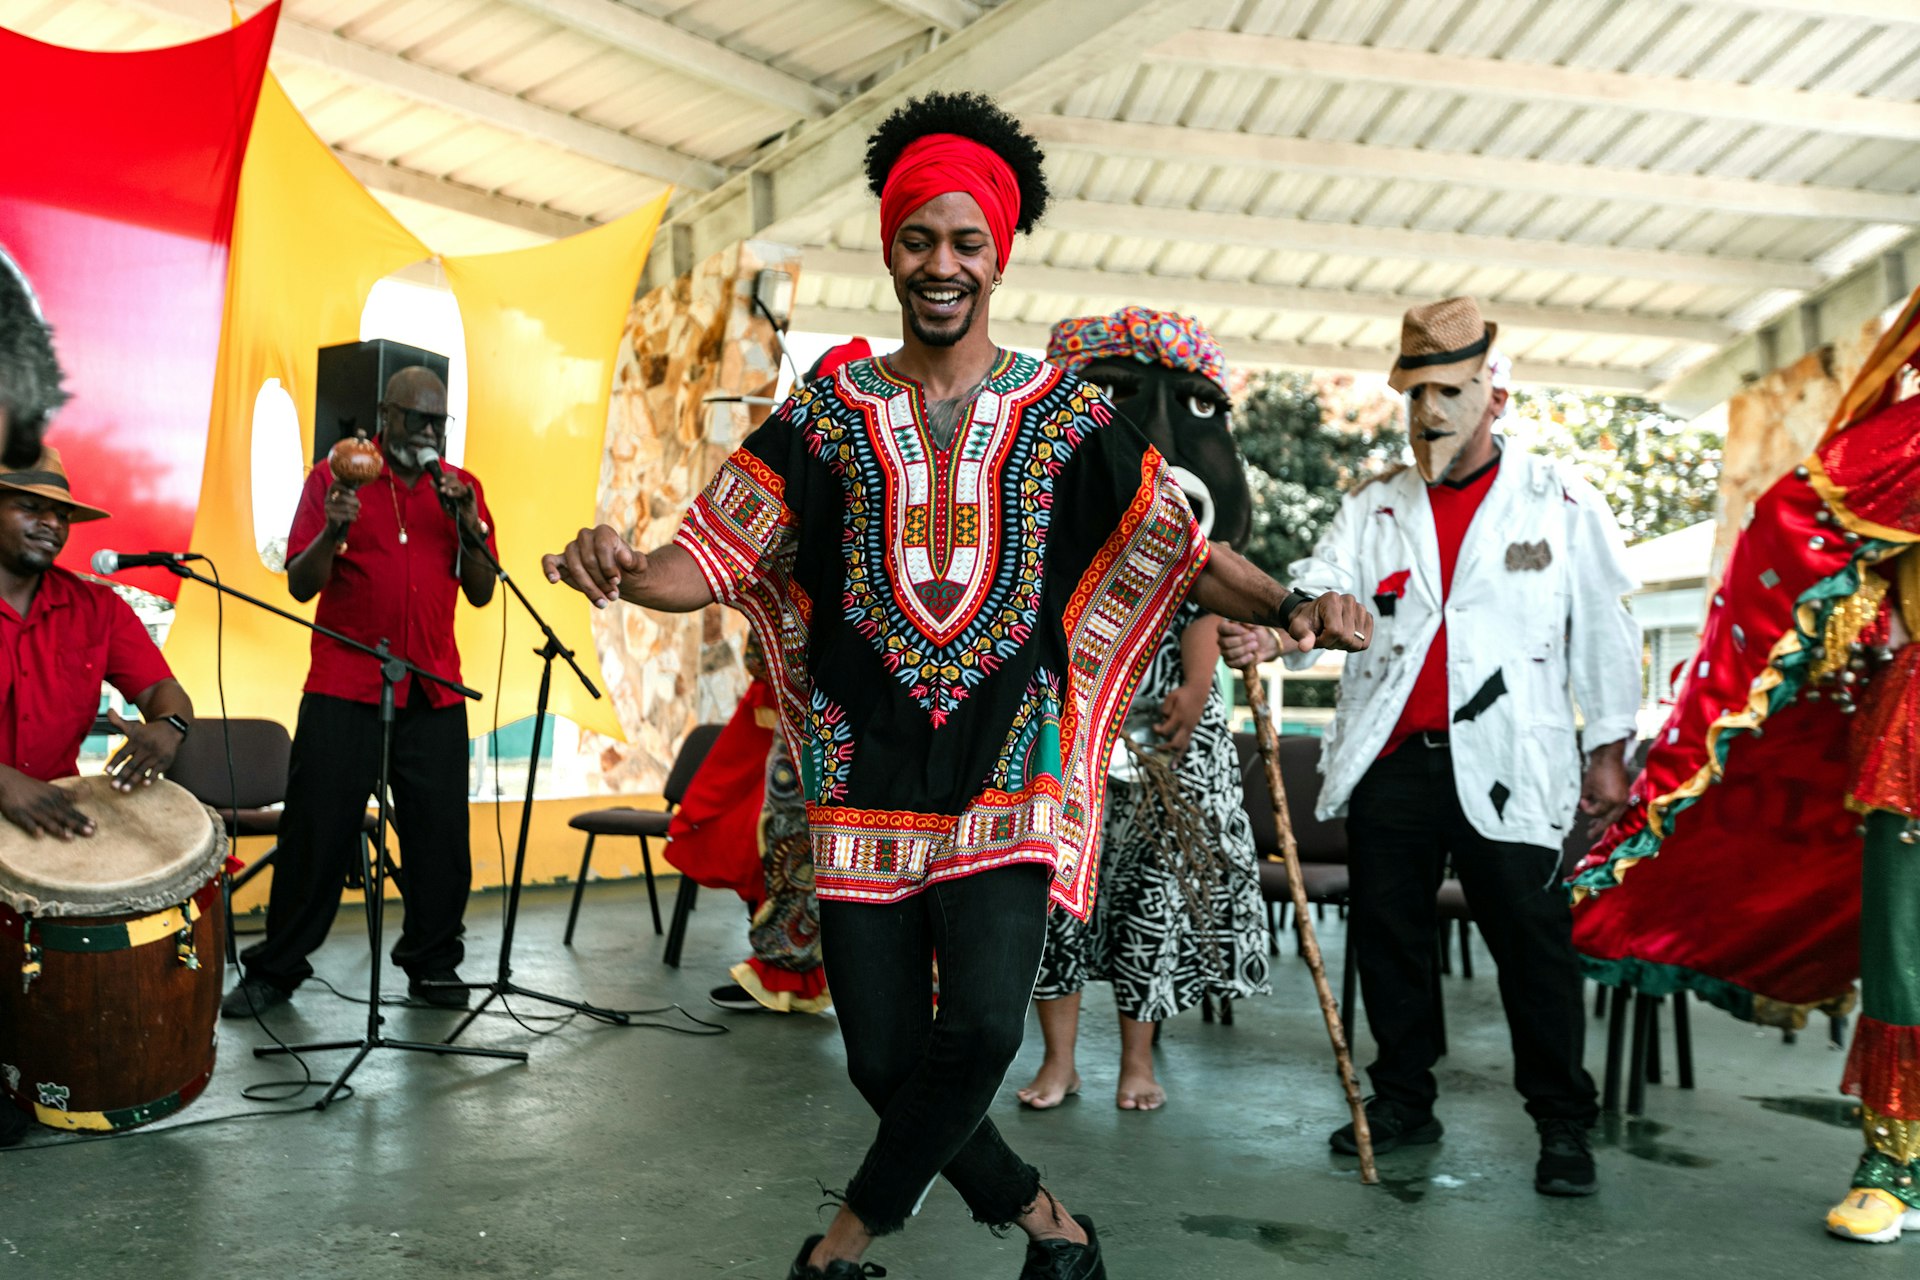 A man wearing a red and black dashiki and a red headwrap dances in front of a band and people wearing traditional masks.  